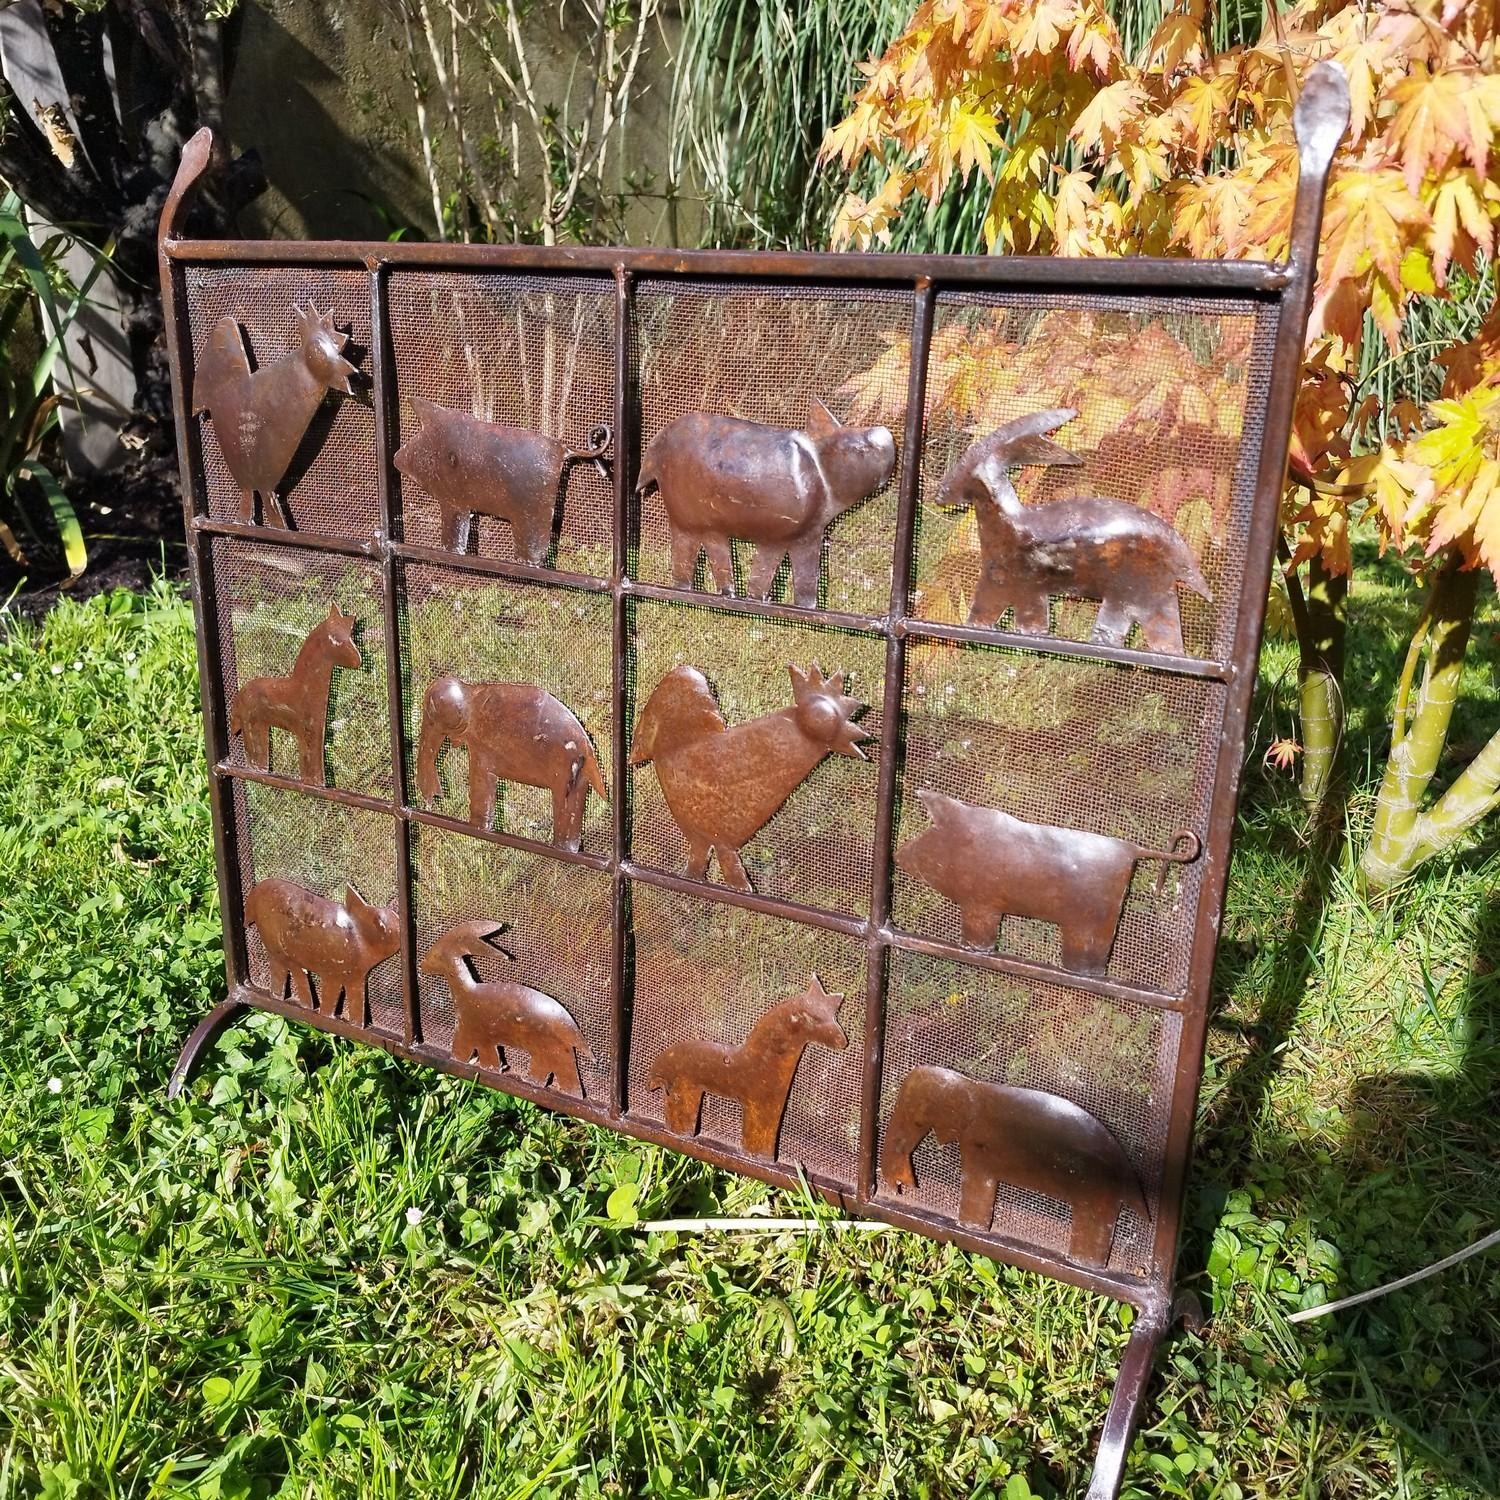 Lovely metal fire screen depicting animals from the 1960's. One of the top is slightly tilted, see photos.
Do not hesitate to ask me for a shipping quote, I work with a local shipper.